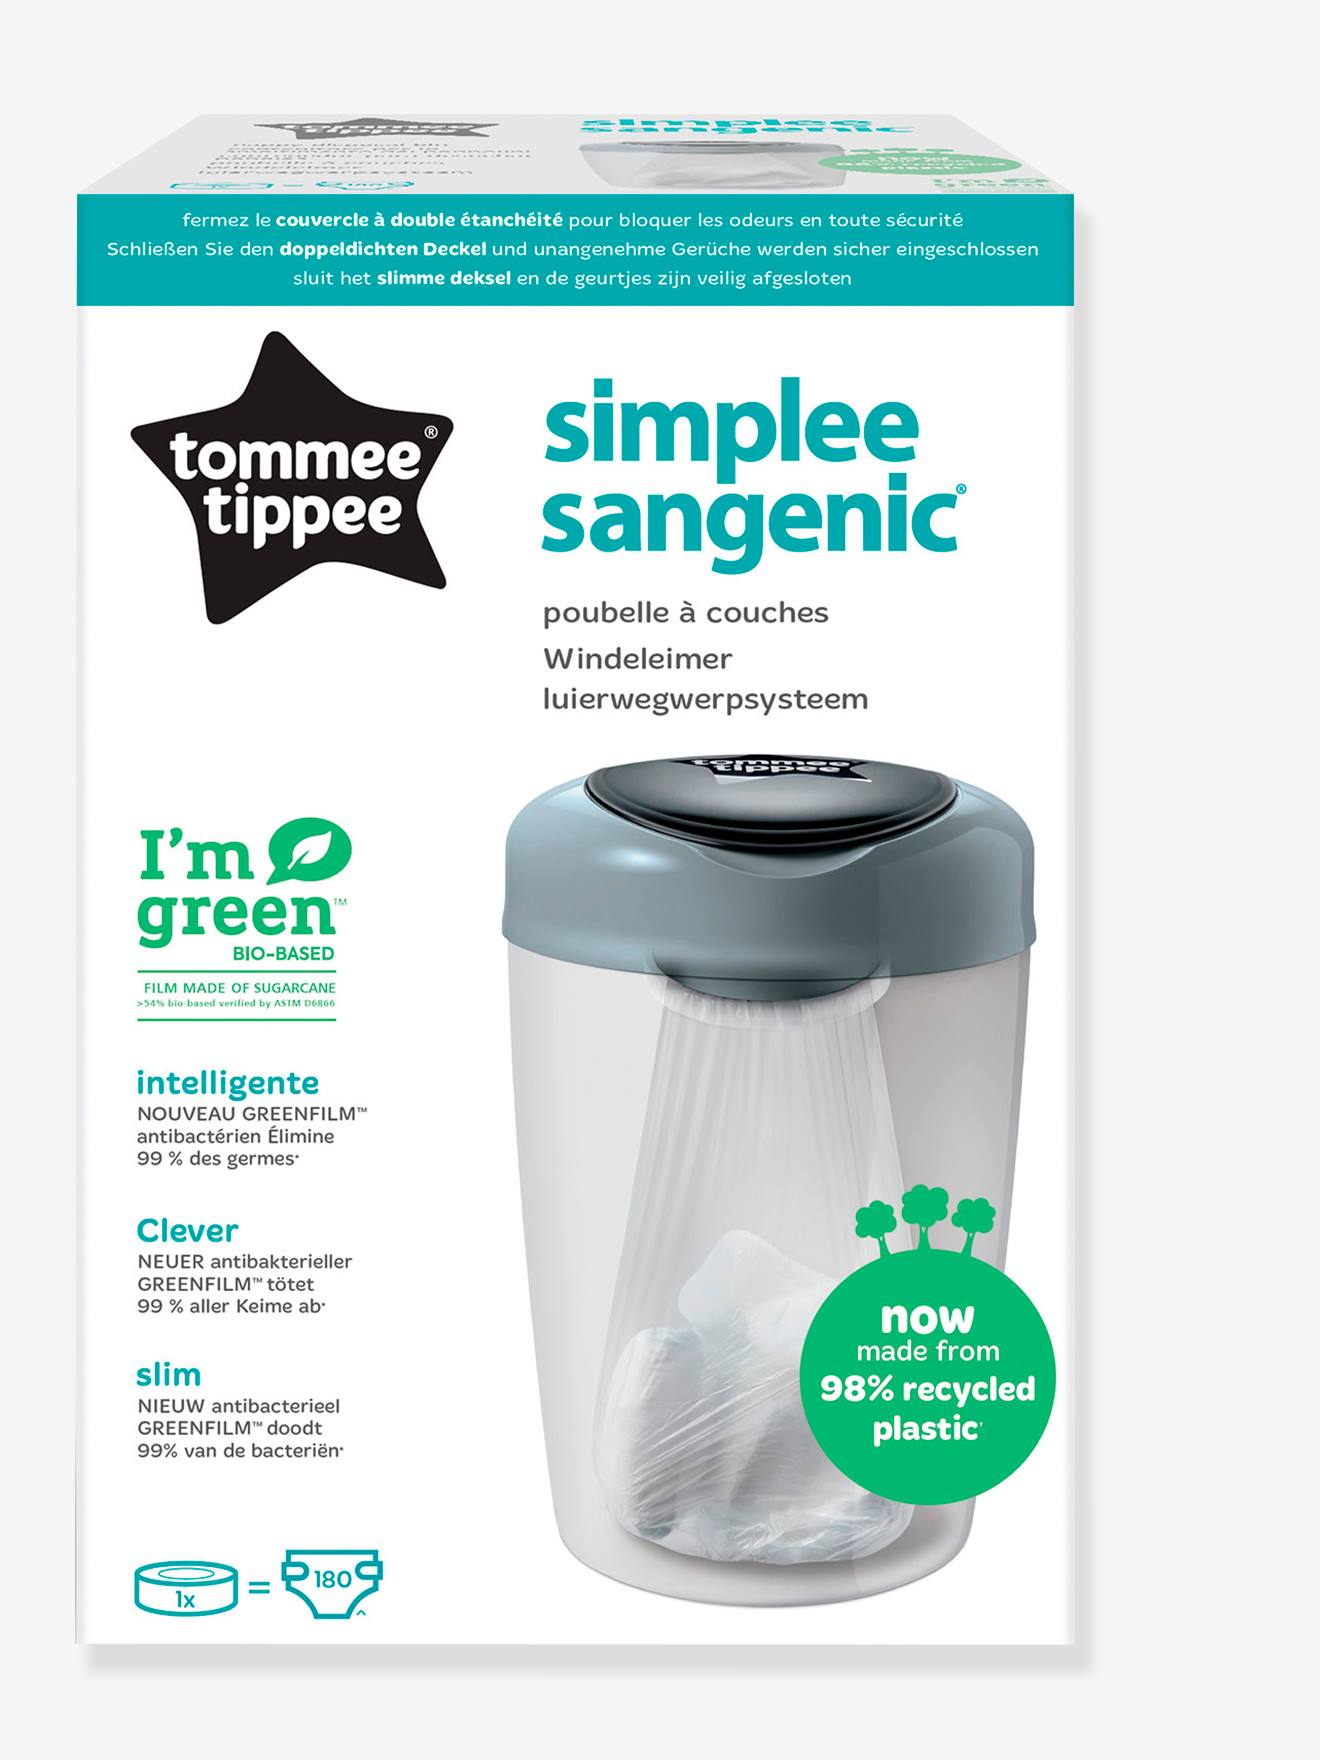 Poubelle à couches - Tommee Tippee